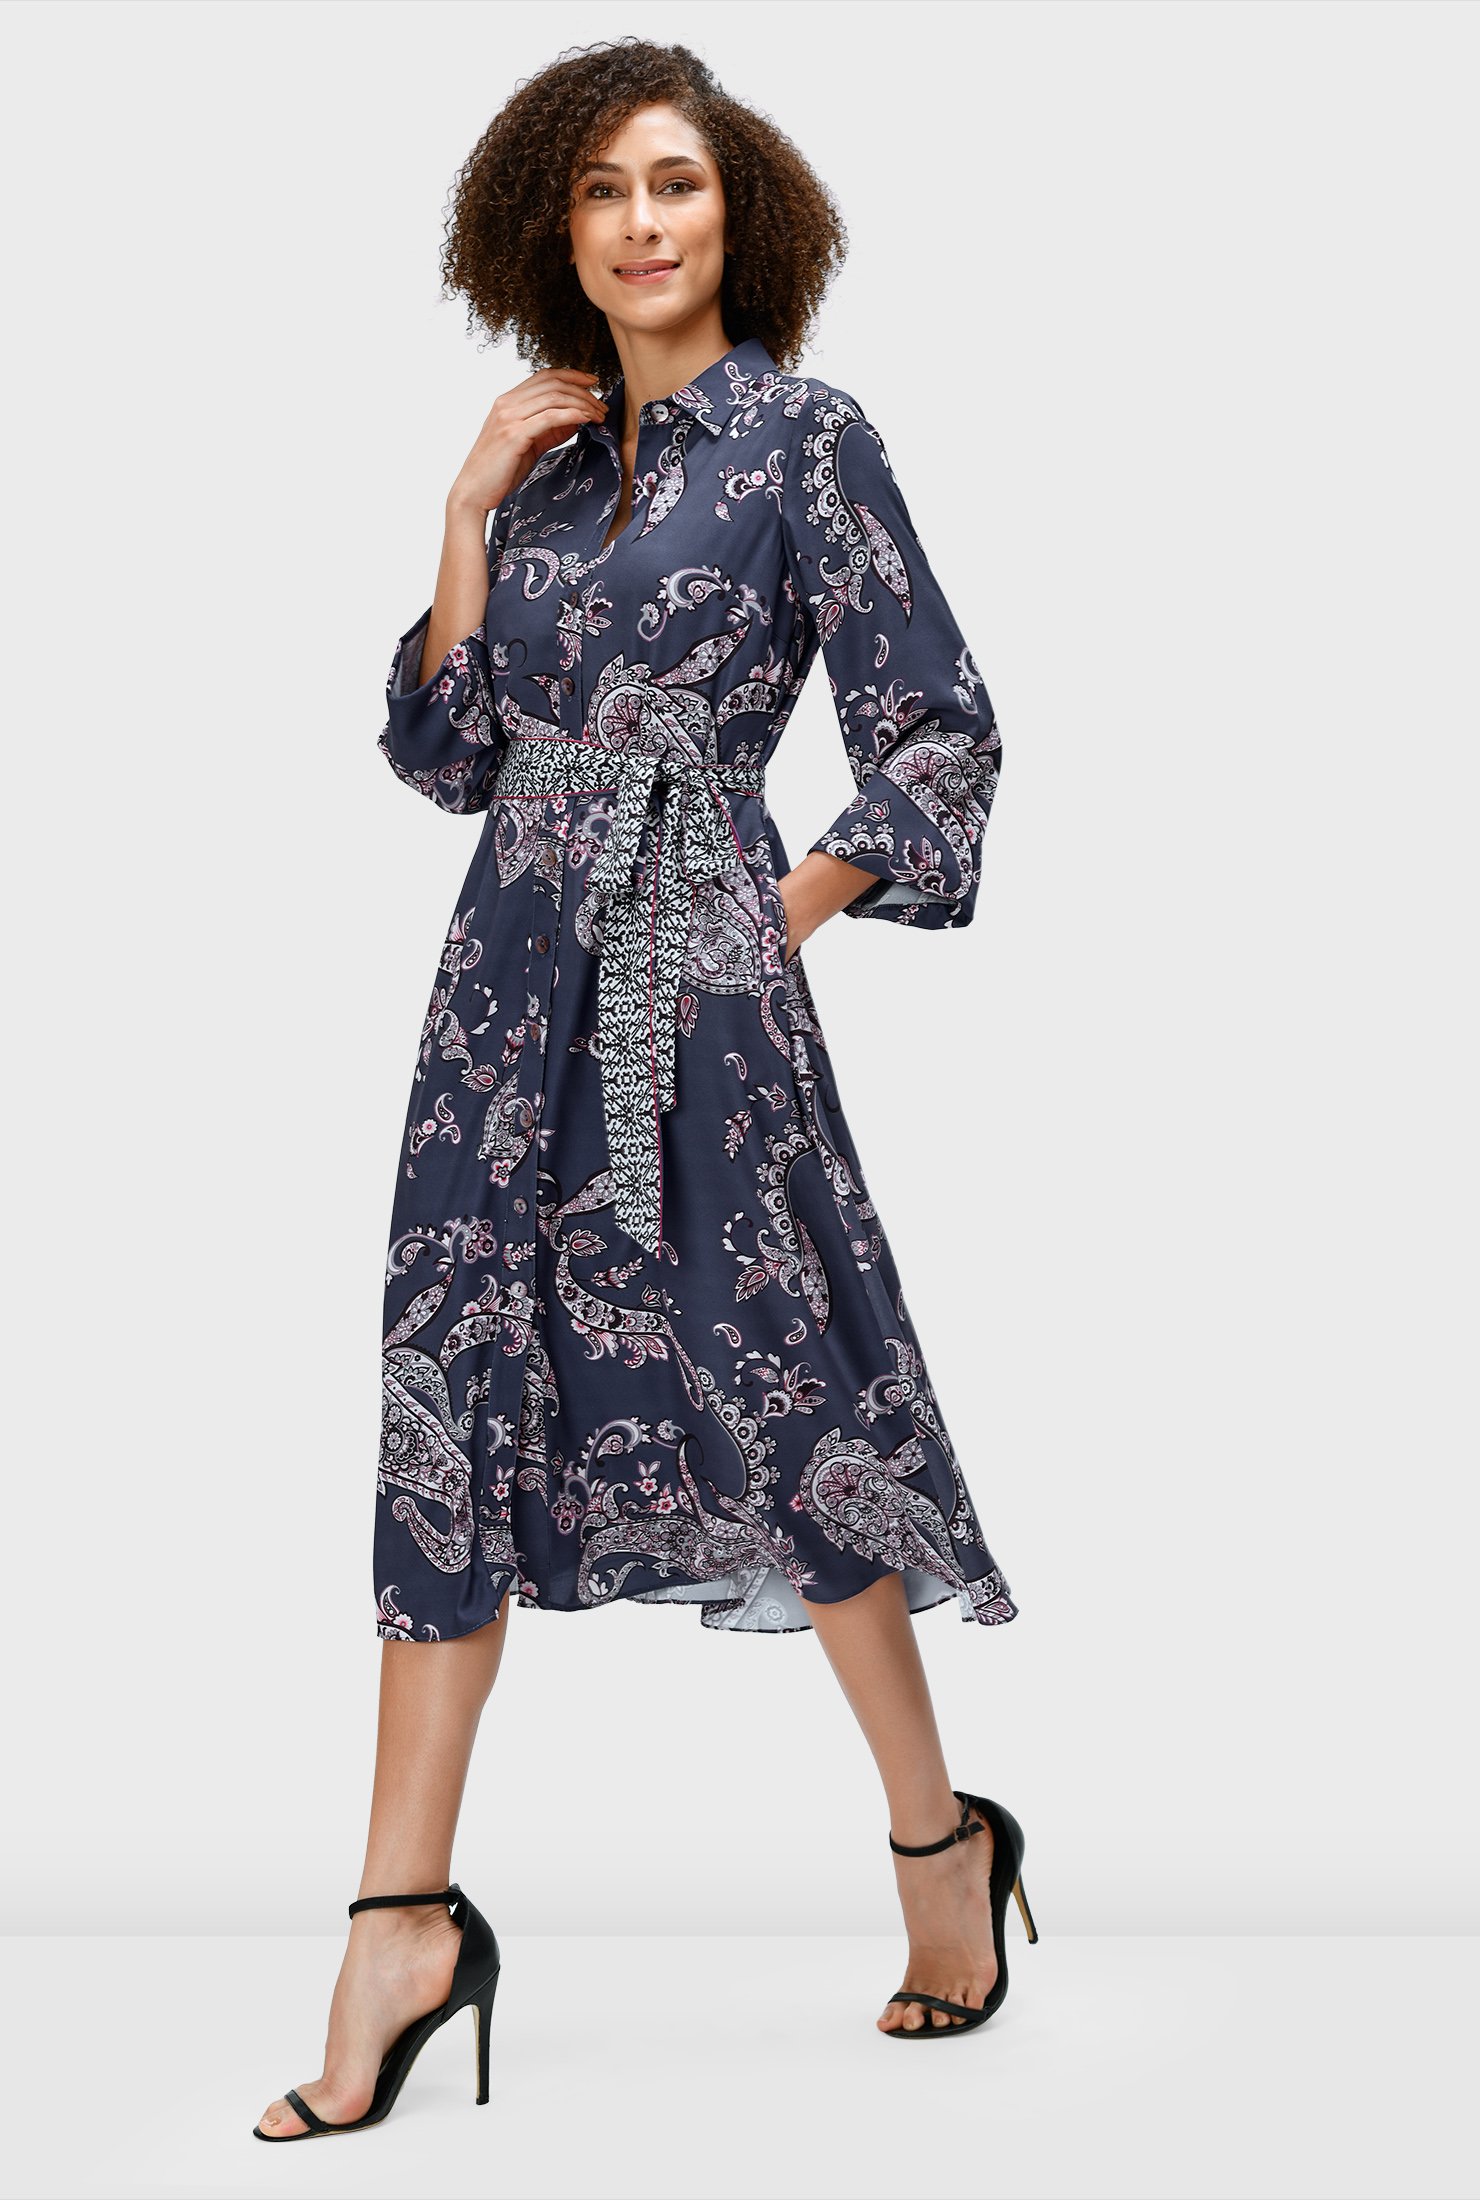 There's little out there that's better than our classic paisley print crepe shirtdress you can wear again and again and can be used all year long.